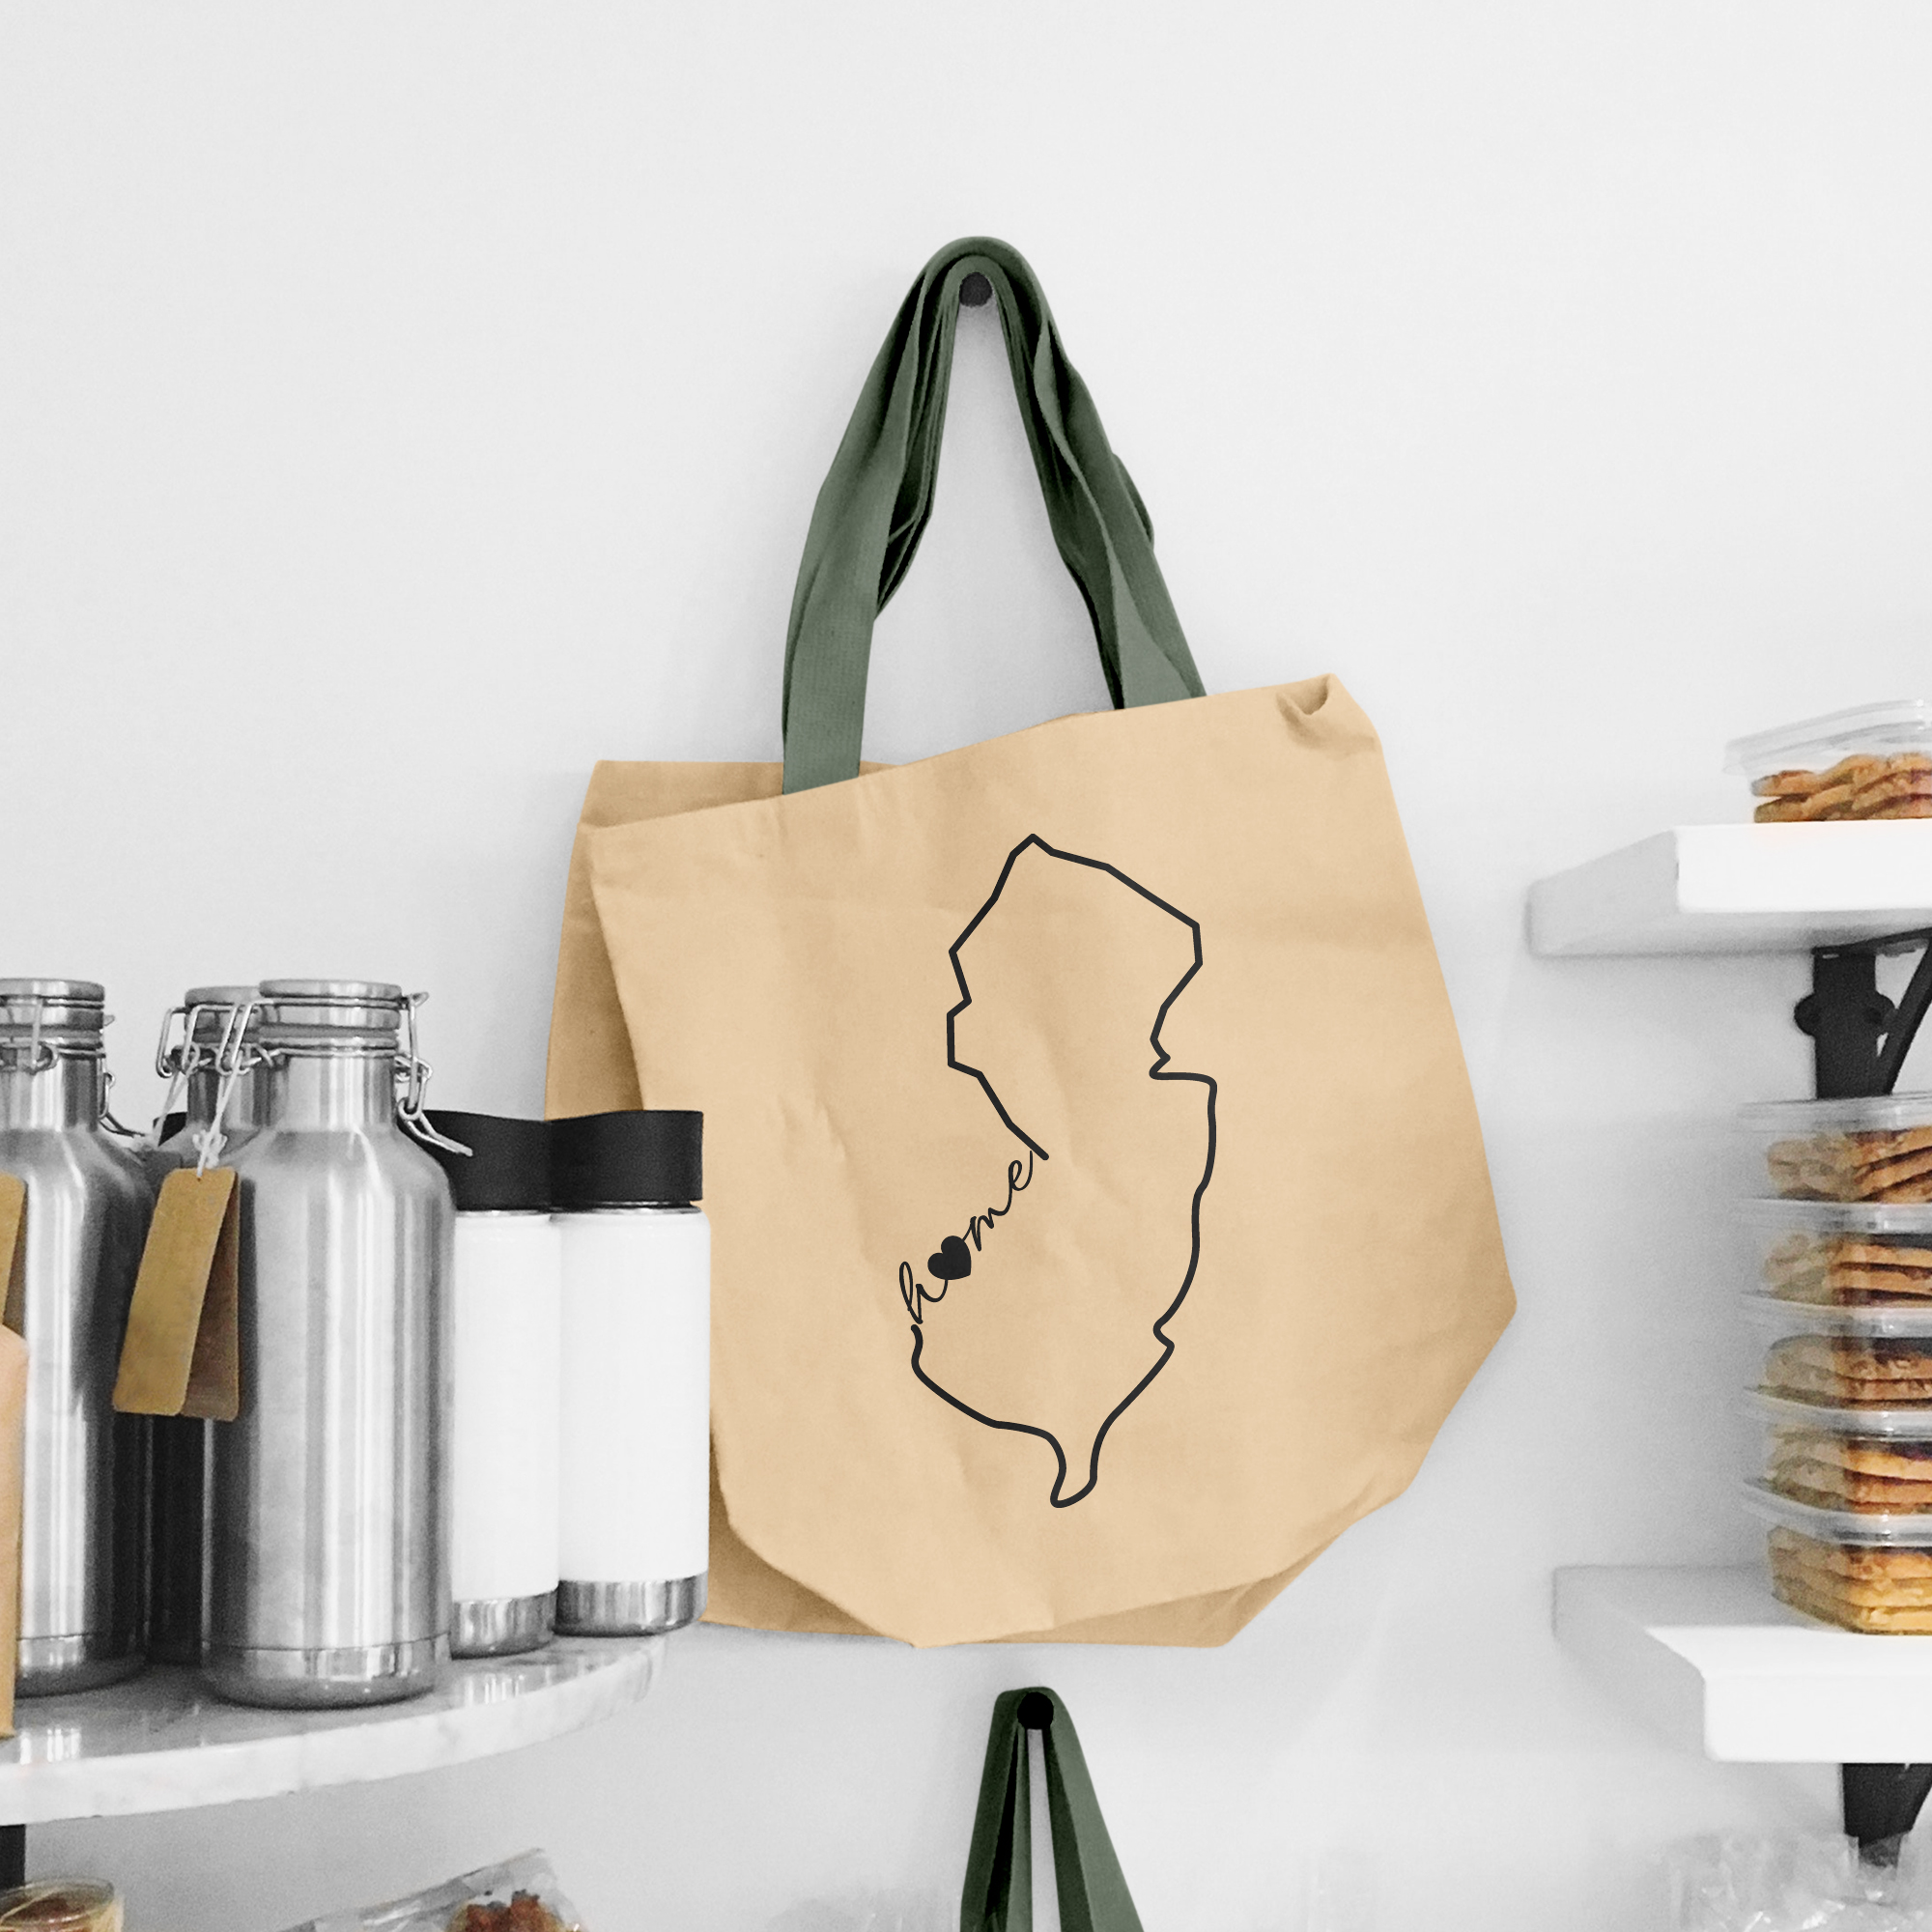 Black illustration of map of New Jersey on the beige shopping bag with dirty green handle.